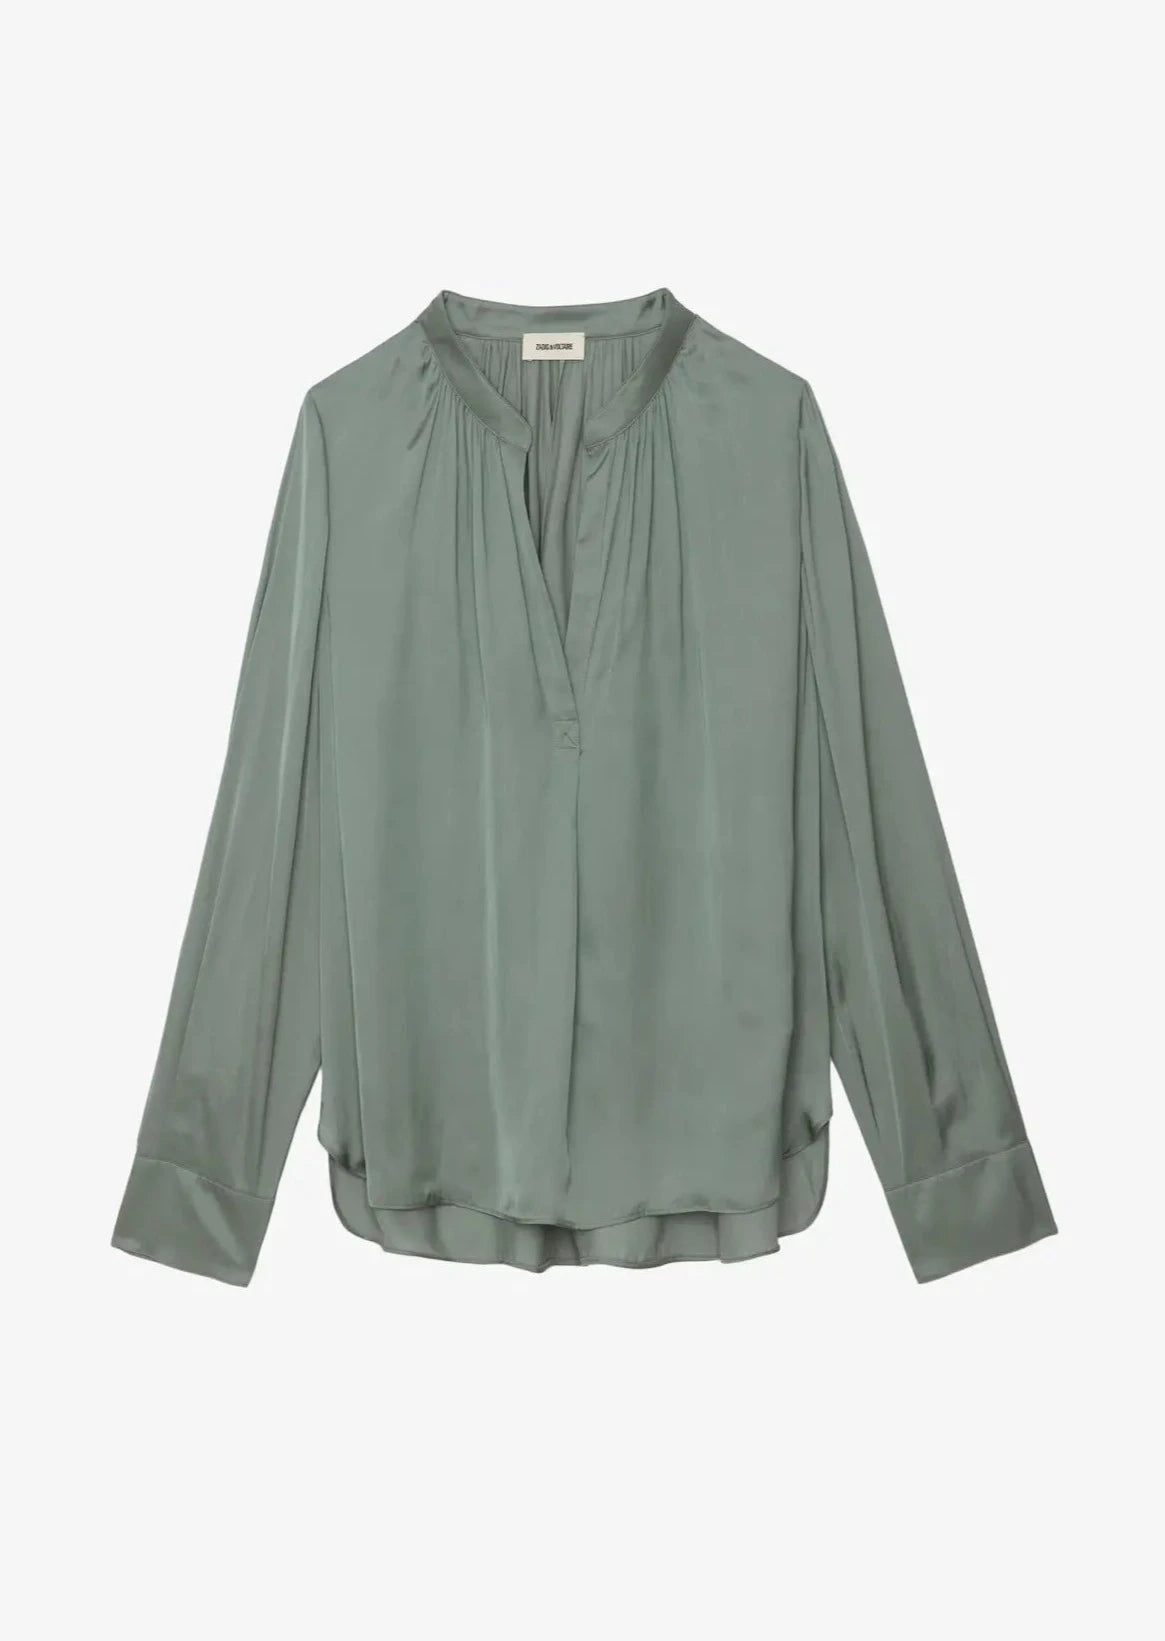 Zadig & Voltaire Tink Satin Blouse - Olive